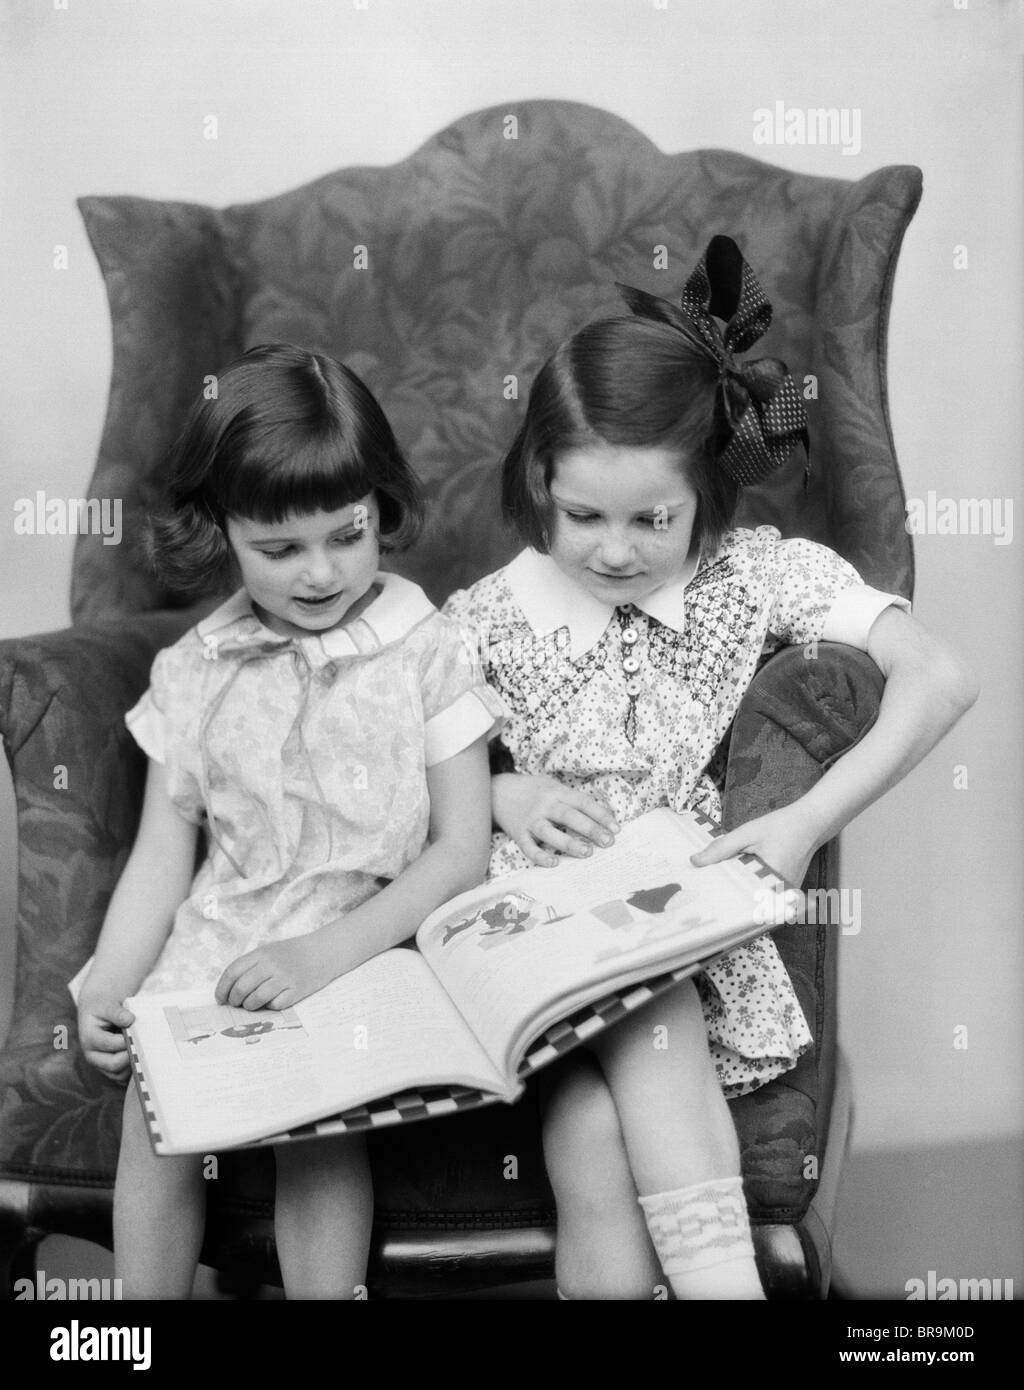 1920s 1930s TWO GIRLS SITTING SIDE BY SIDE IN CHAIR READING BOOK Stock Photo